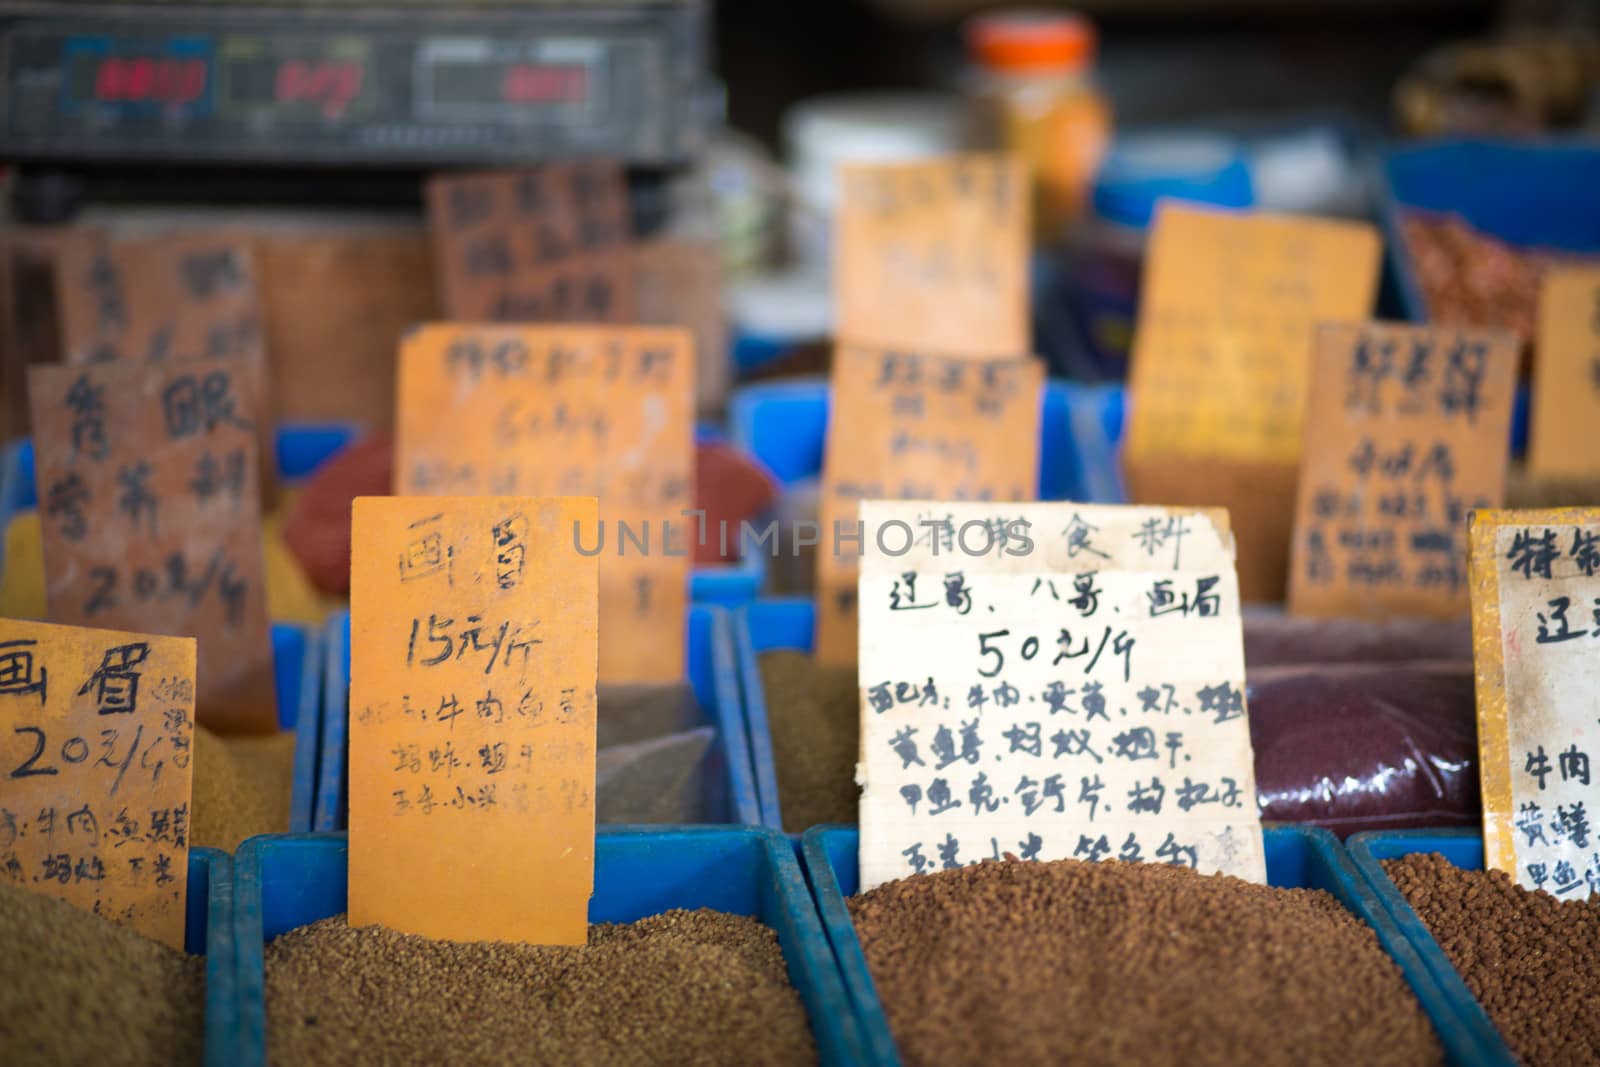 Various beans at a local market in Shanghai, China 2013